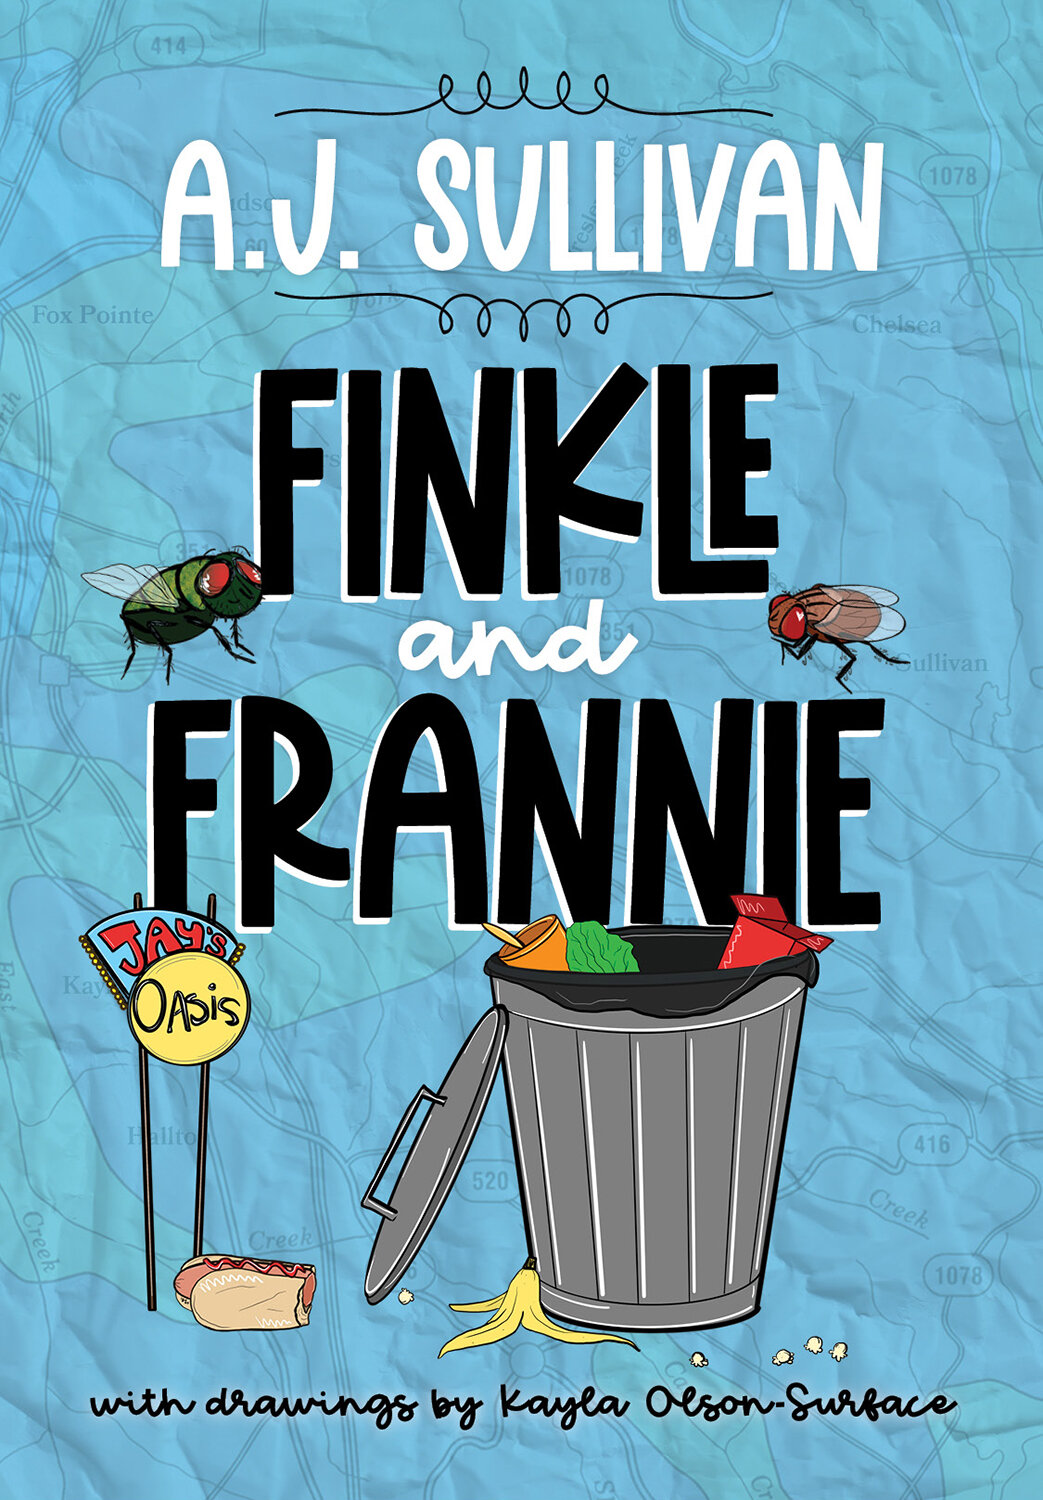 finkle_and_frannie-cover-draft.jpg